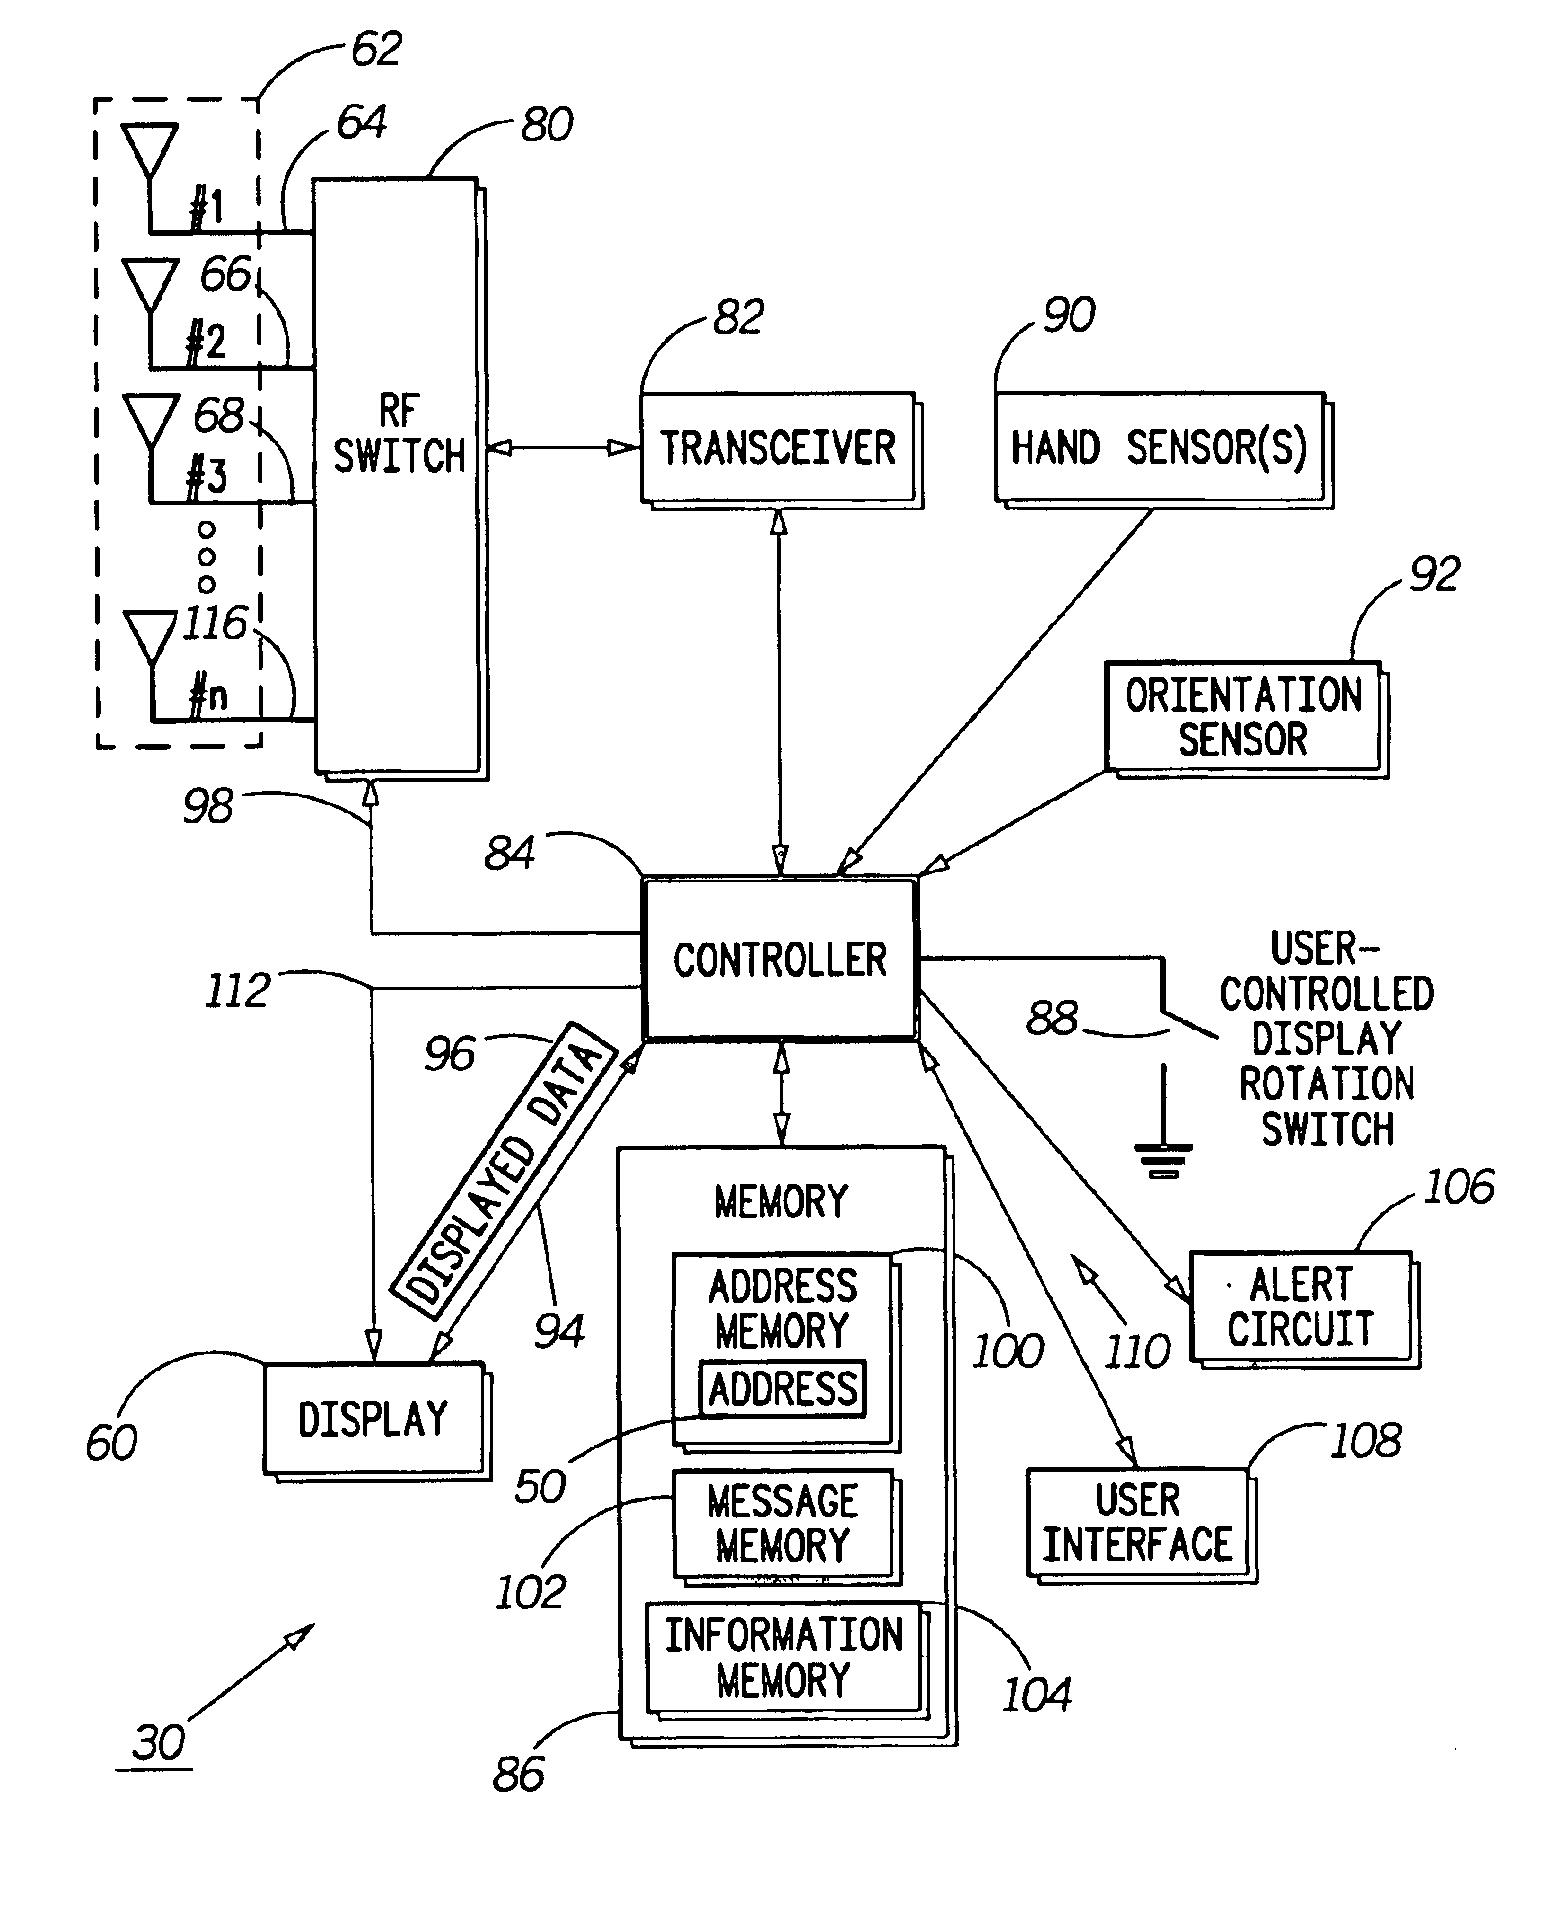 Antenna system for a wireless information device